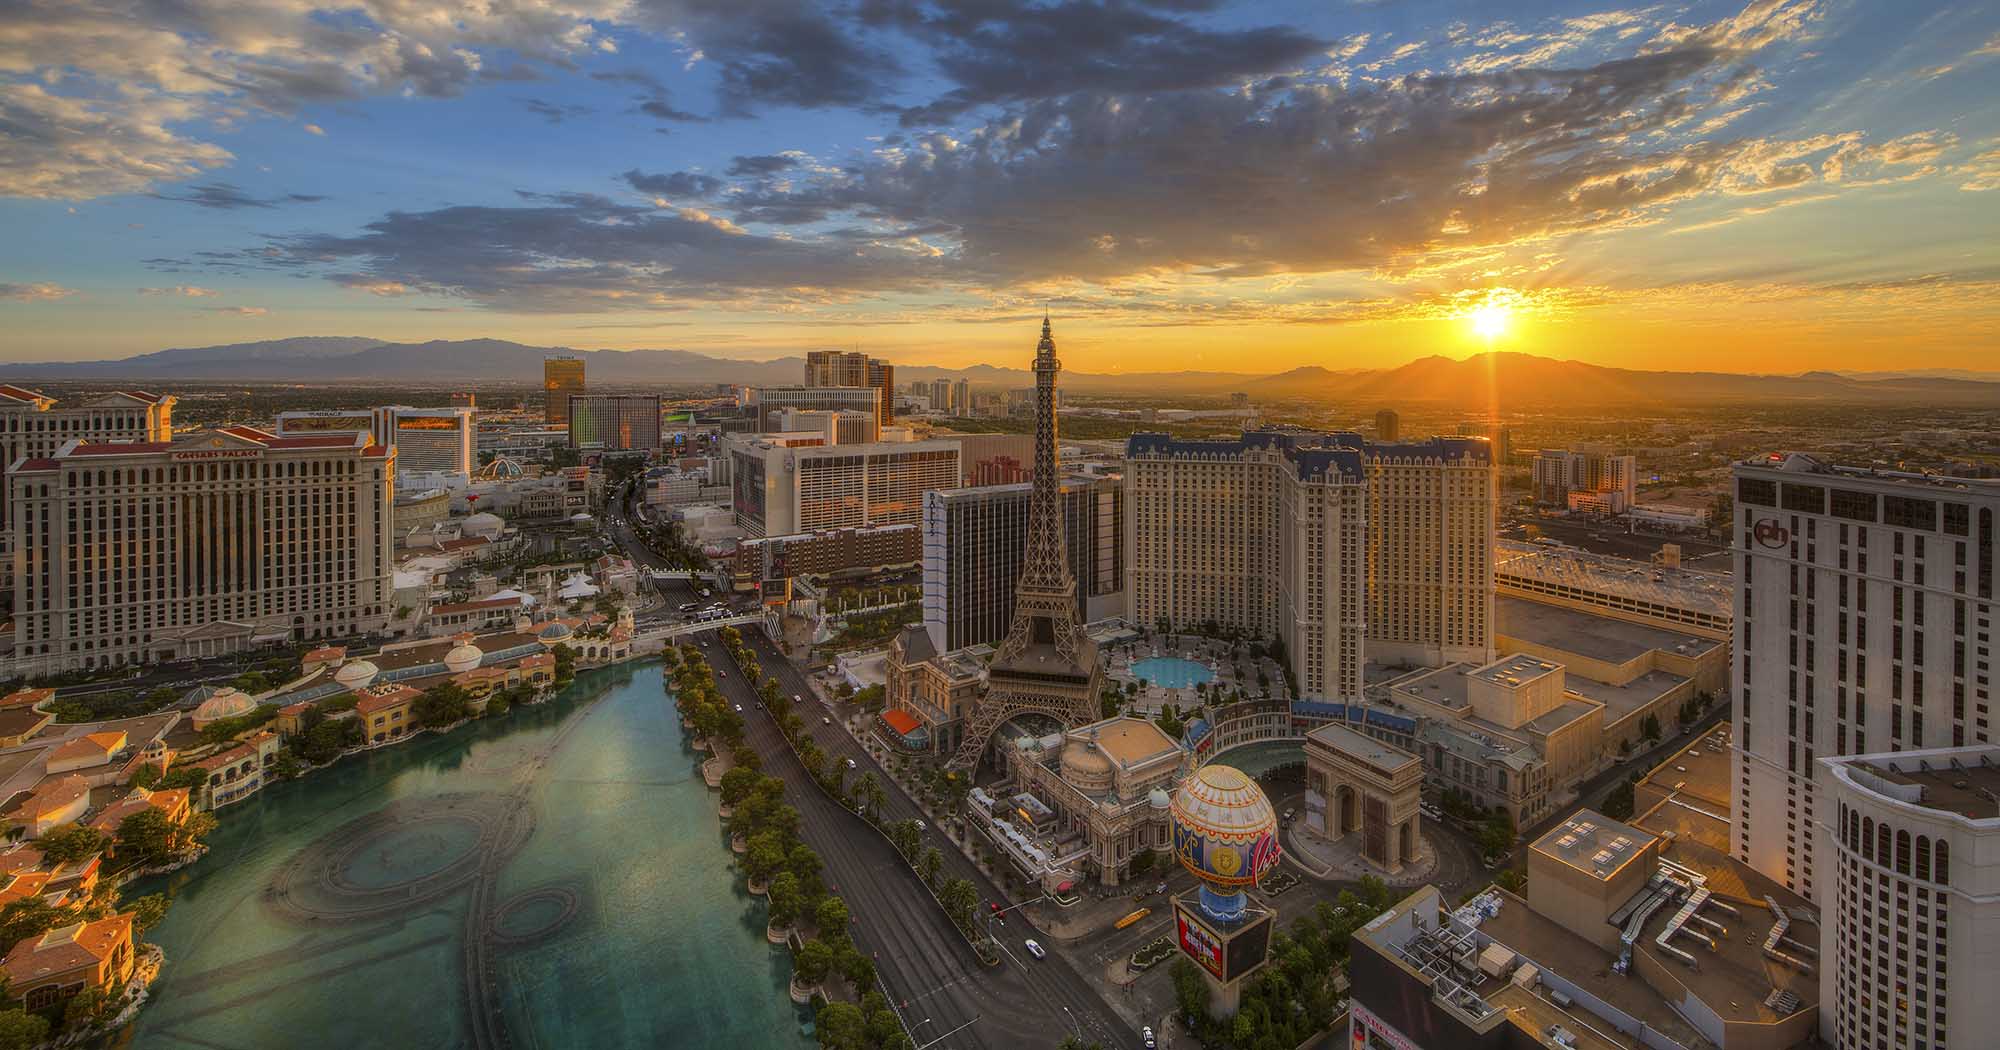 Las Vegas Weather In April: A Guide To The Climate In Sin City